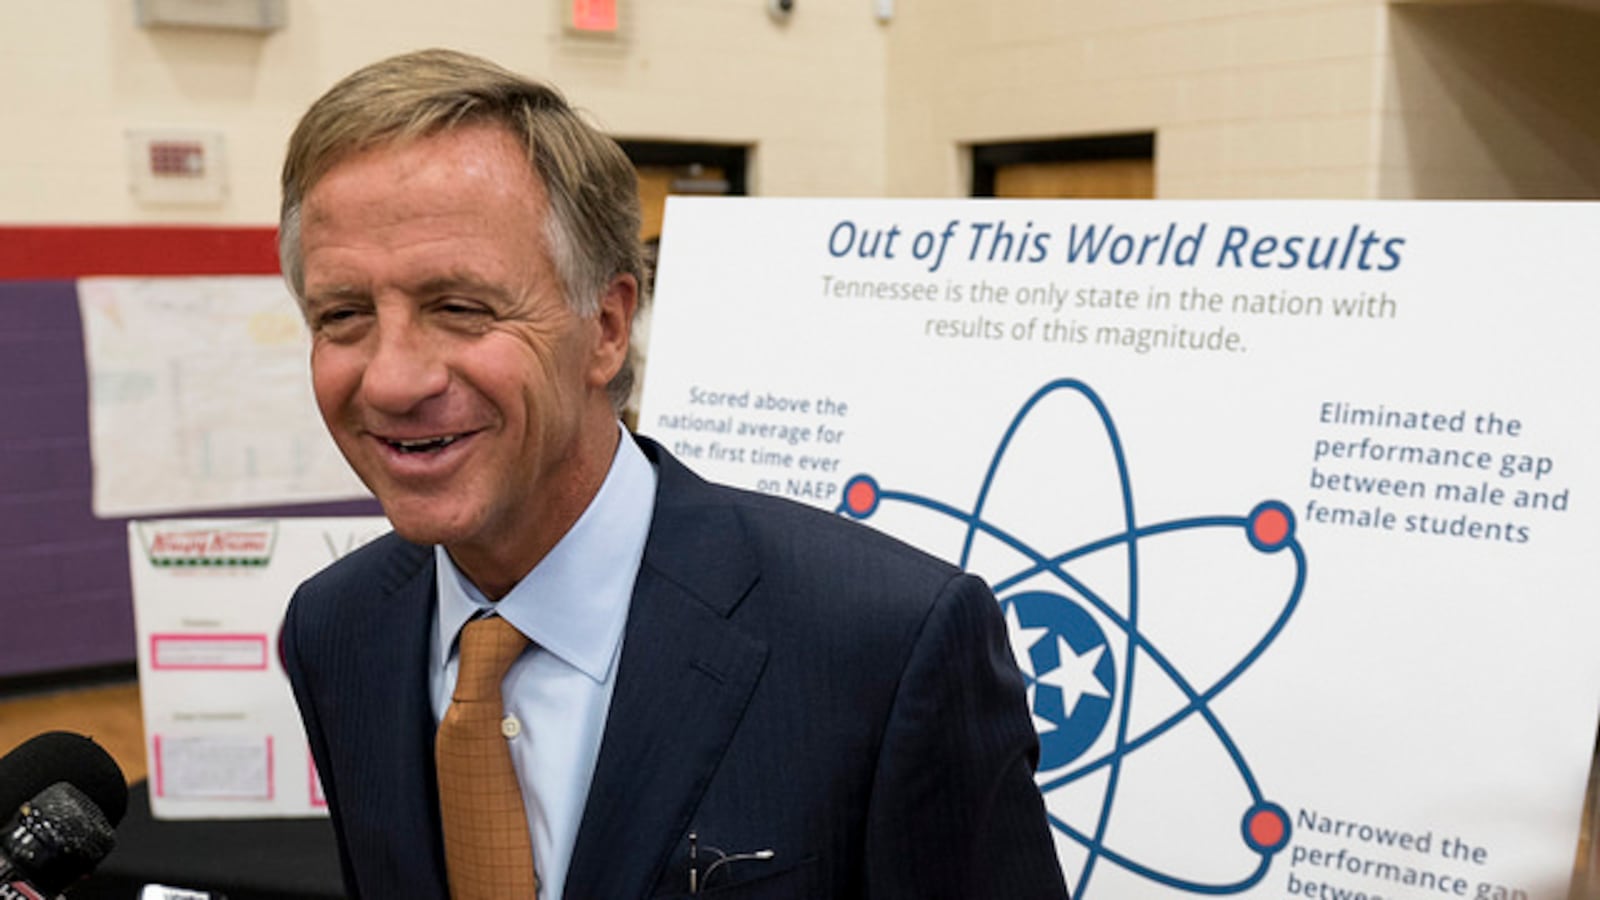 Gov. Bill Haslam celebrates  in 2016 after Tennessee outpaced almost all other states in gains on a science exam administered by the National Assessment of Educational Progress. The outgoing Republican governor was named Tuesday as the 2018 recipient of the James Bryant Conant Award, a national honor recognizing outstanding individual contributions to American education.